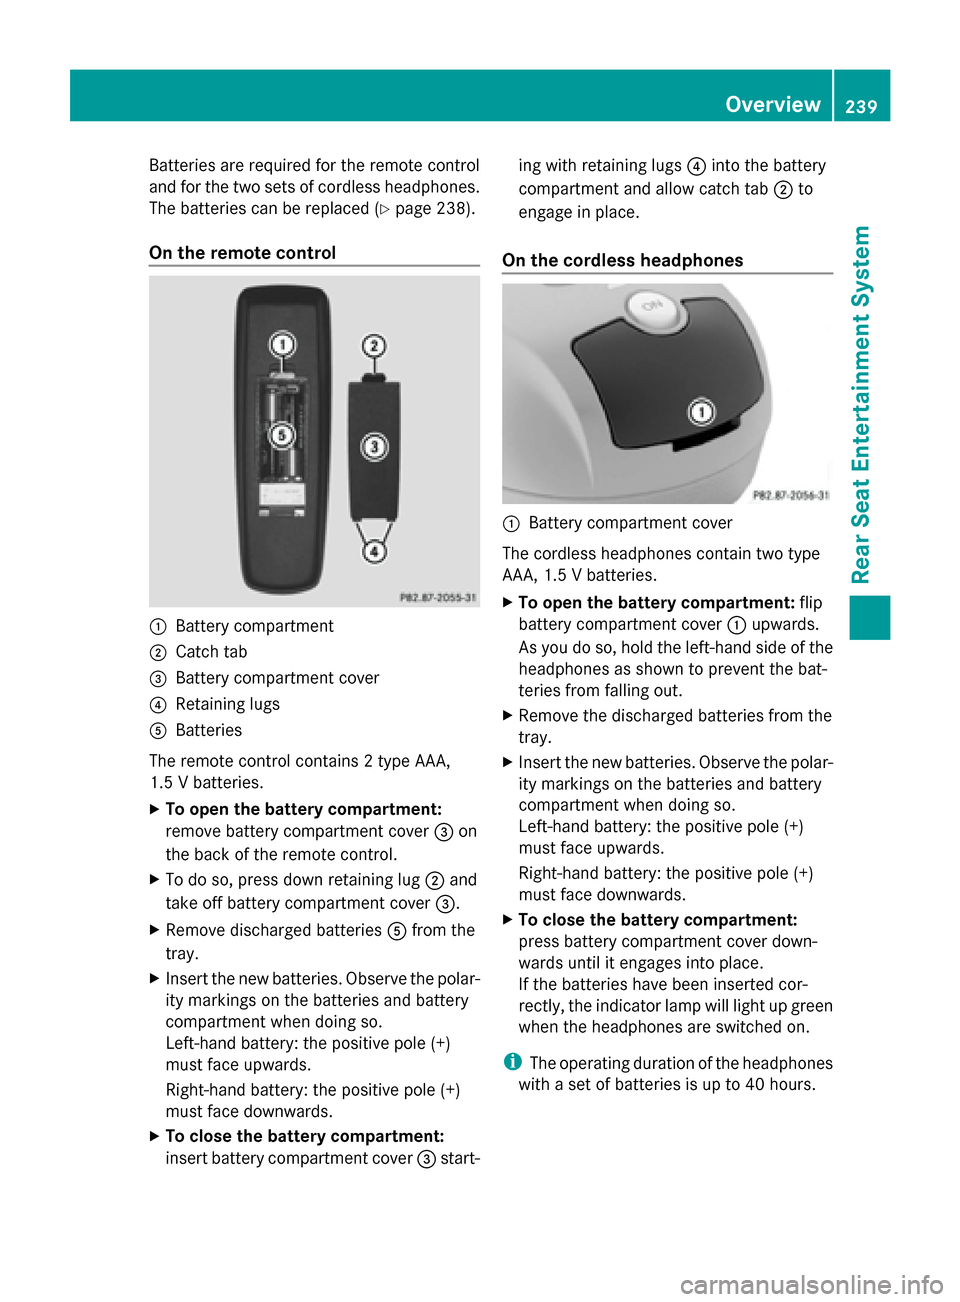 MERCEDES-BENZ GL-Class 2014 X166 Comand Manual Batteries are required for the remote control
and for the two sets of cordless headphones.
The batteries can be replaced (Y page 238).
On the remote control 0043
Battery compartment
0044 Catch tab
008